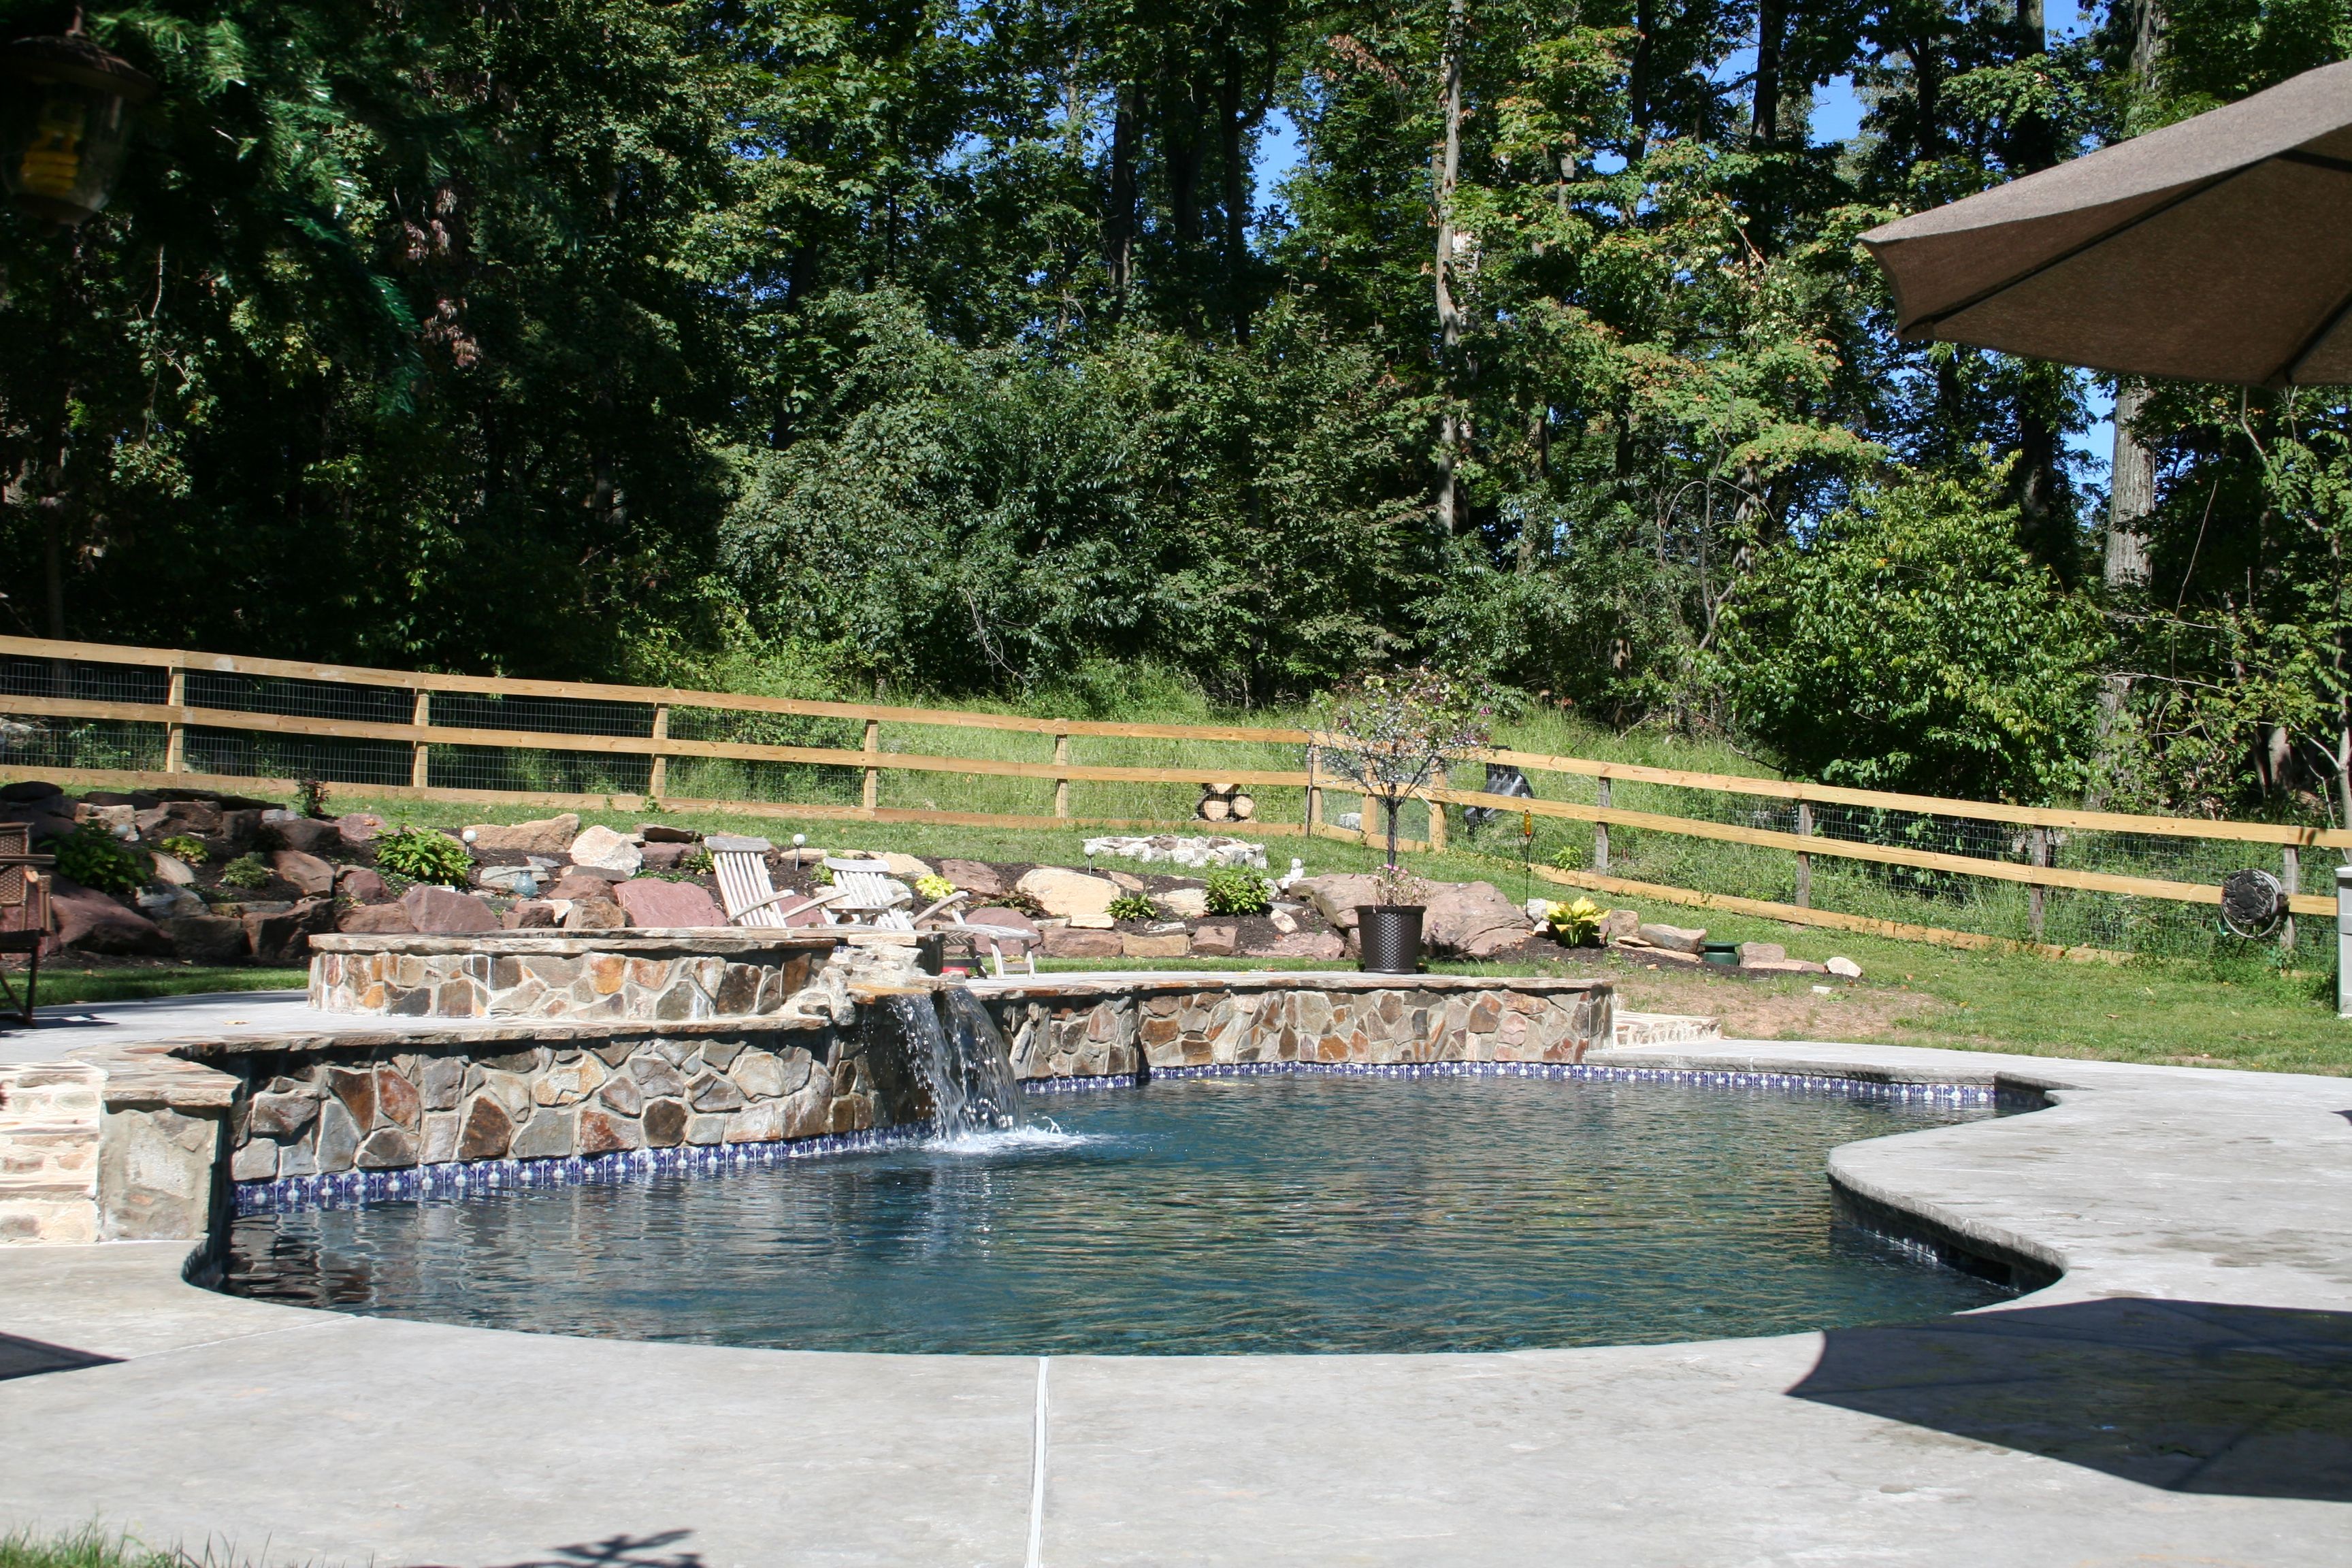 Swimming Pool with Raised & Reverse Bond Beams | The Pool Company Construction